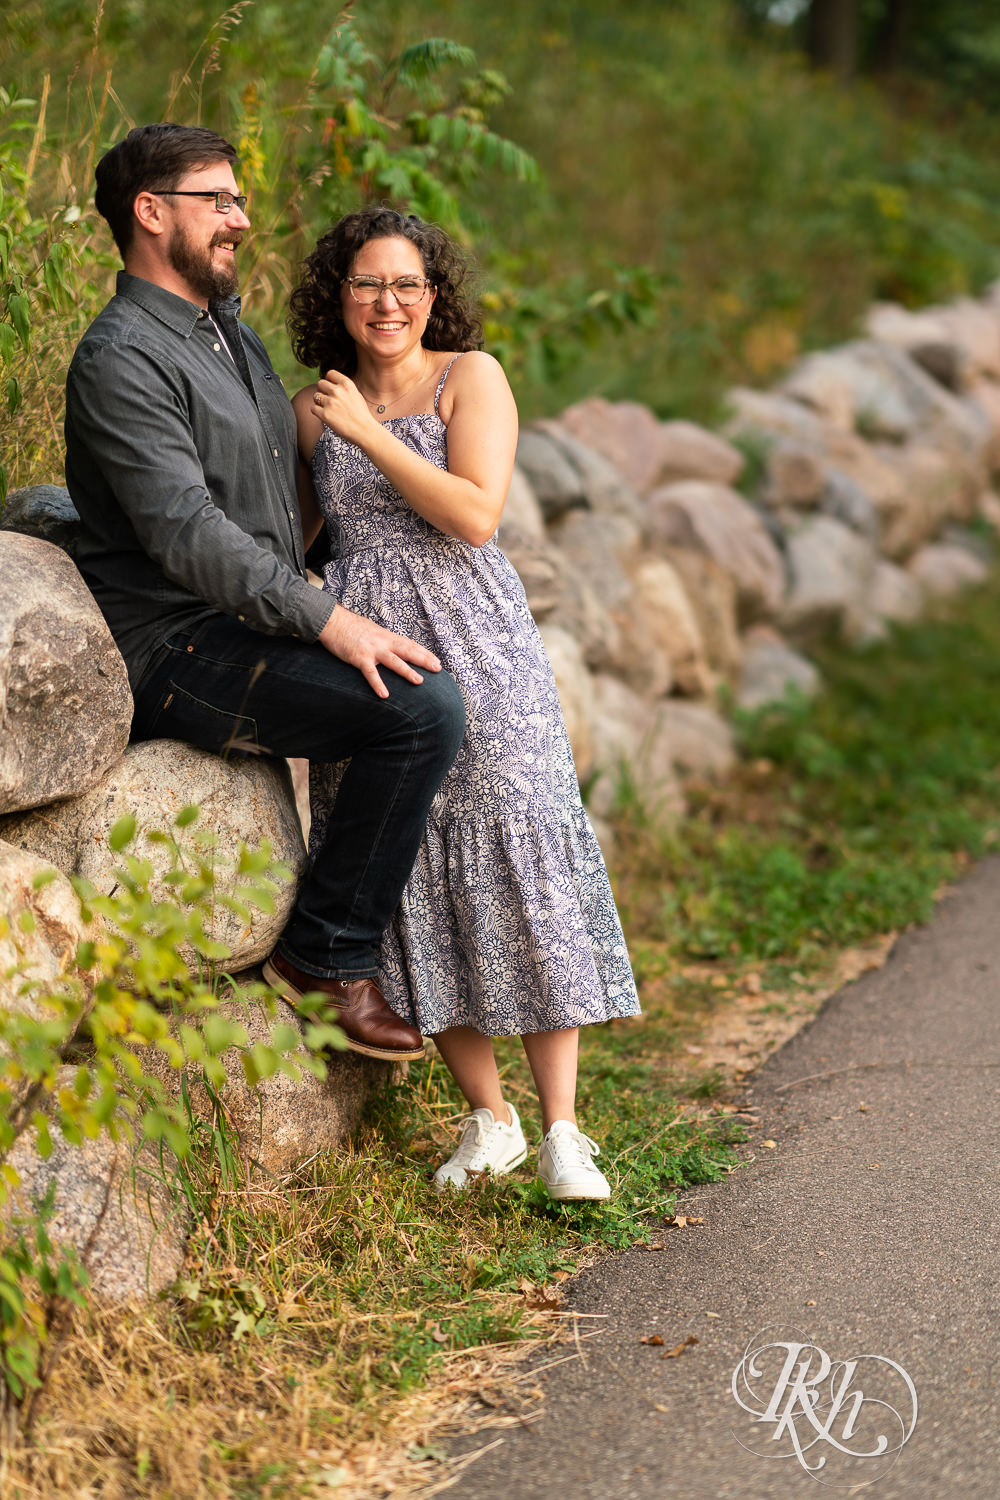 Man and woman in glasses laughing at sunset engagement session in Eagan, Minnesota.